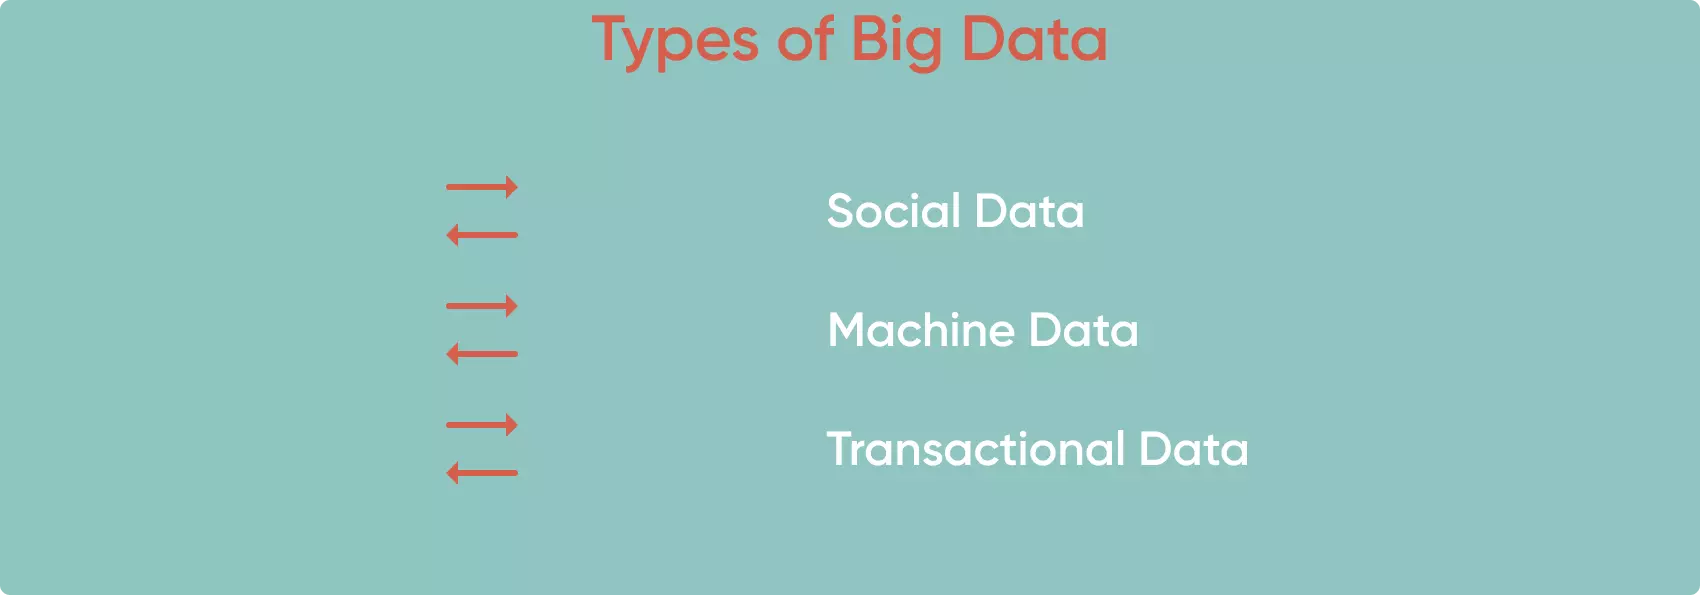 There are a number of different sources of Big Data and we divide sources of Big Data into three types: social, machine, and transactional.